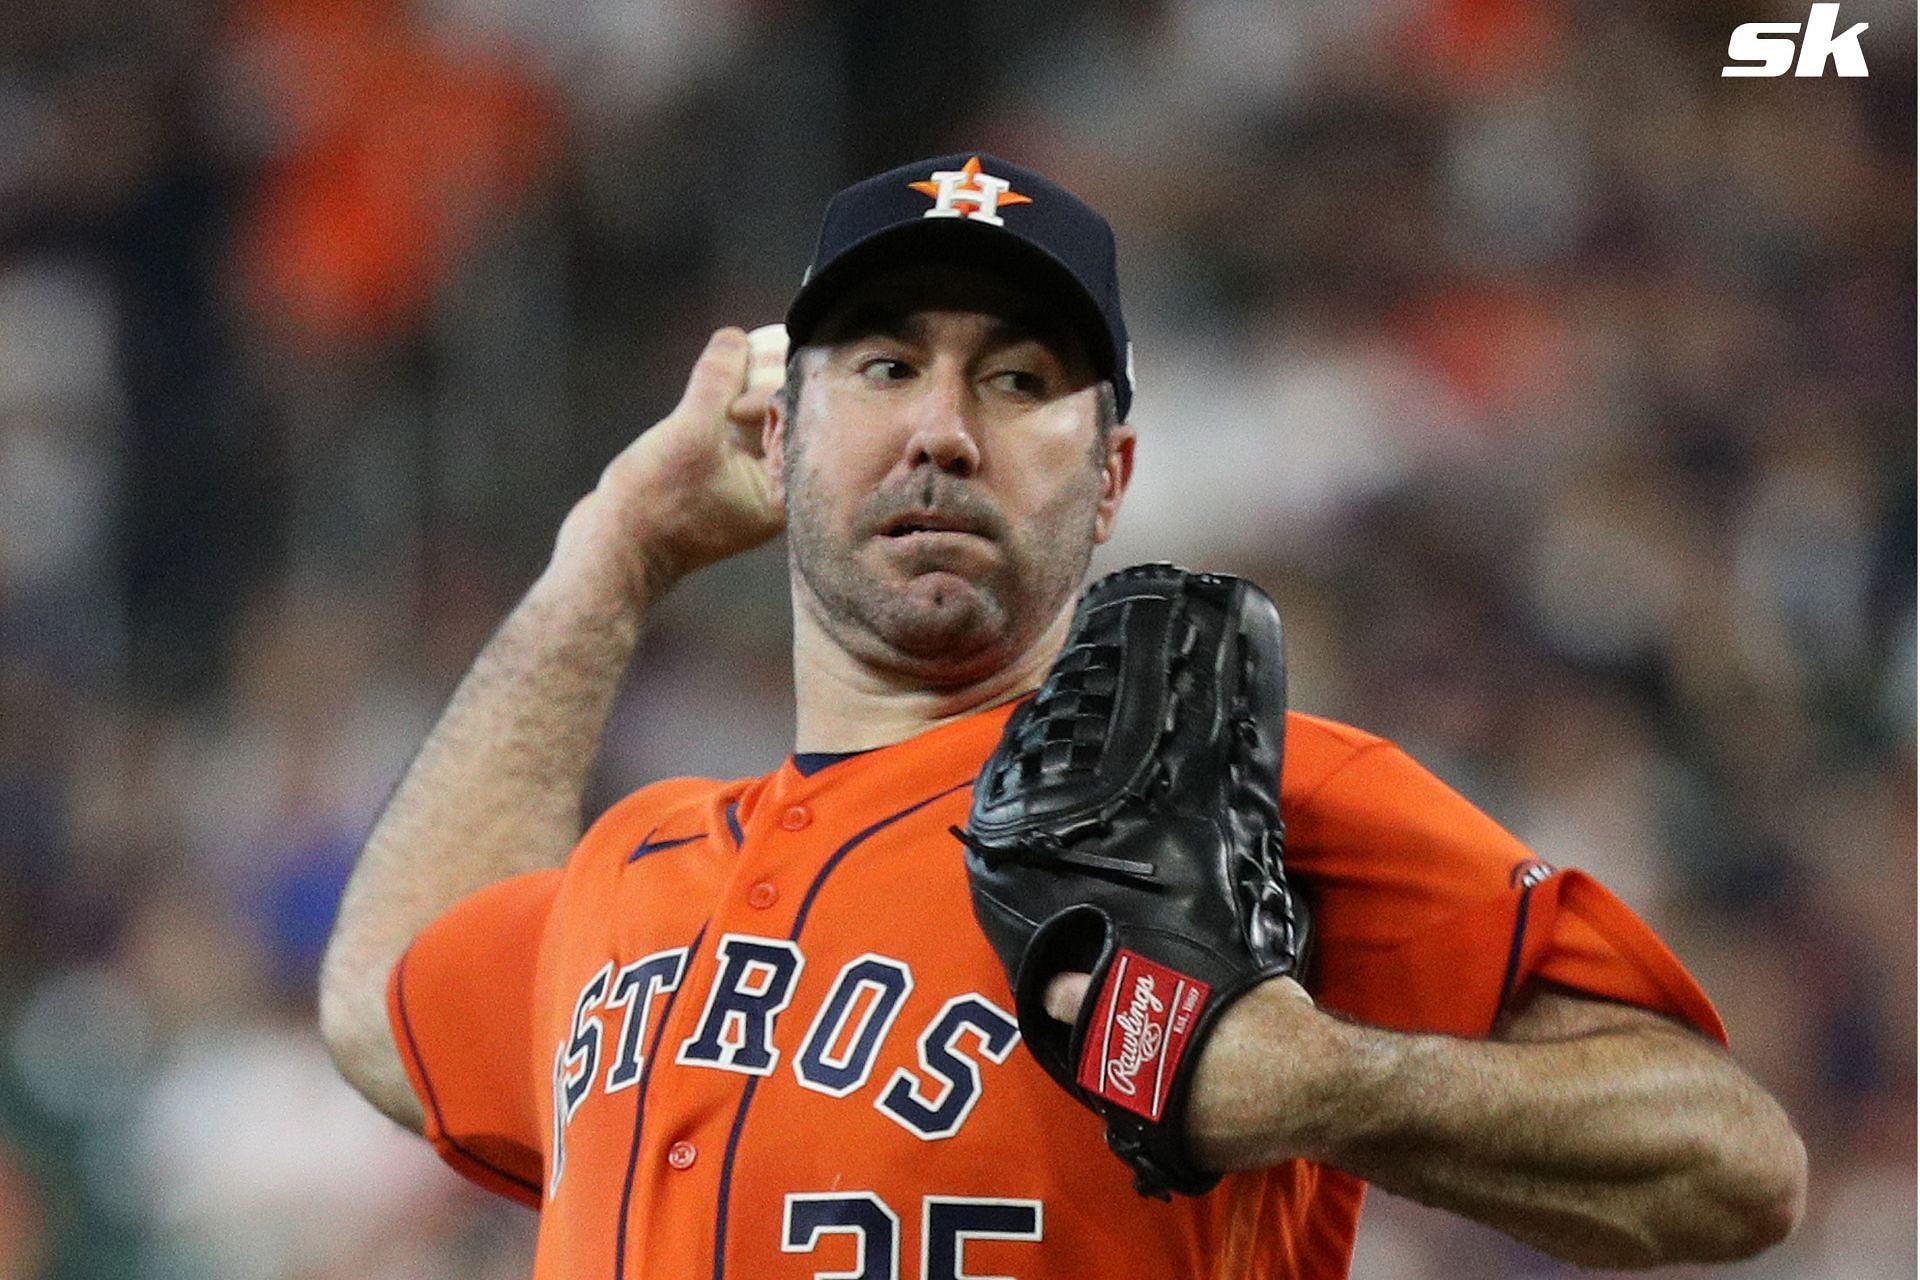 Justin Verlander discusses what needs to change in MLB